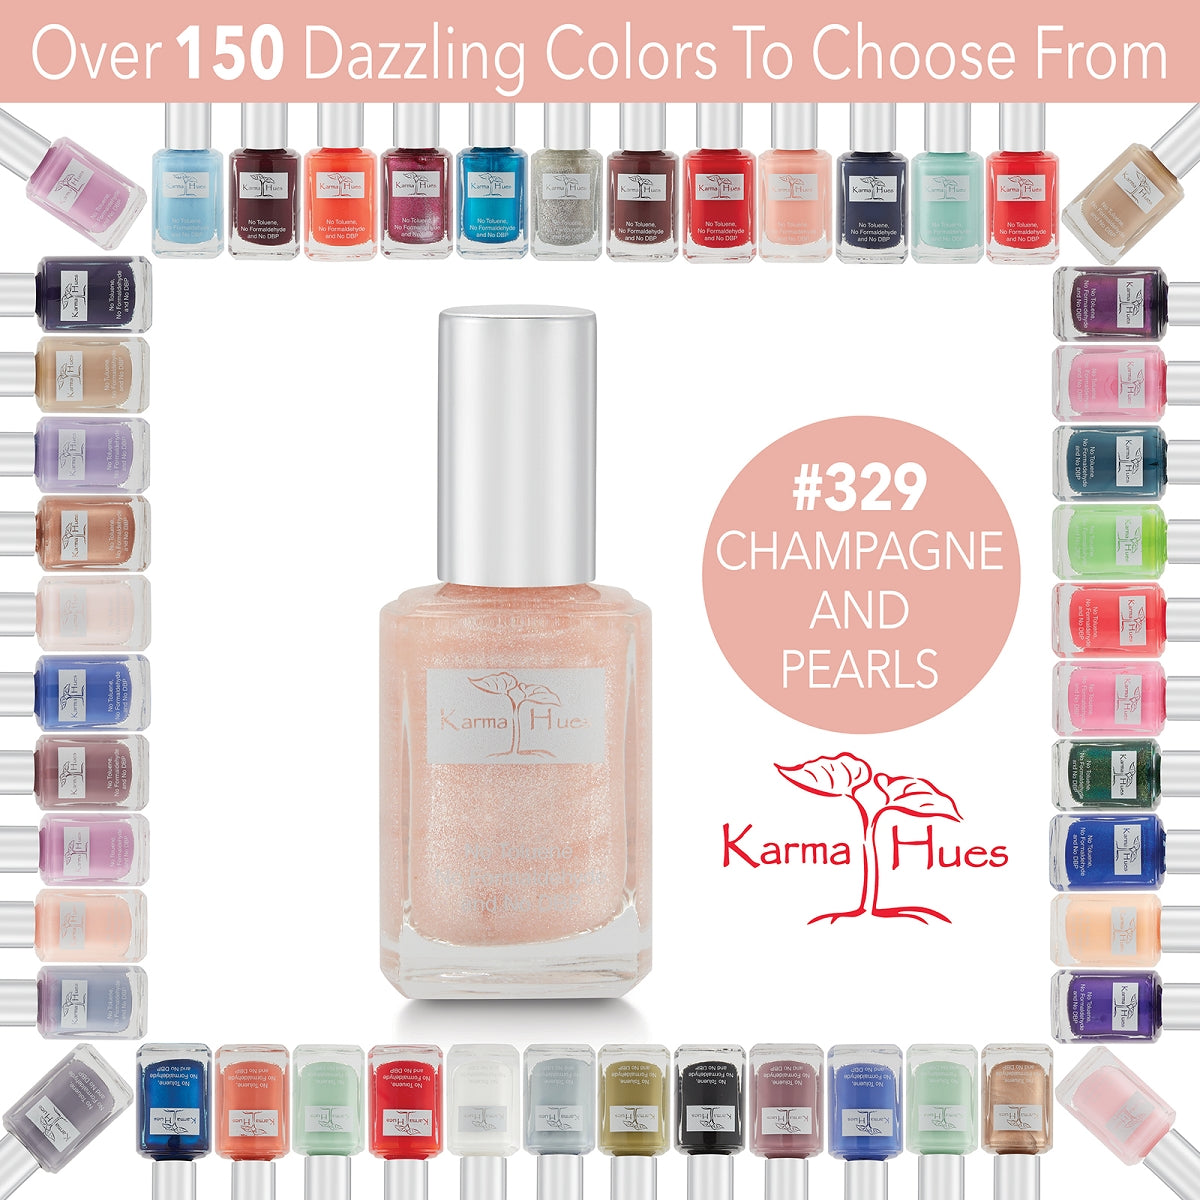 Champagne and Pearls - Nail Polish; Non-Toxic, Vegan, and Cruelty-Free (#329)